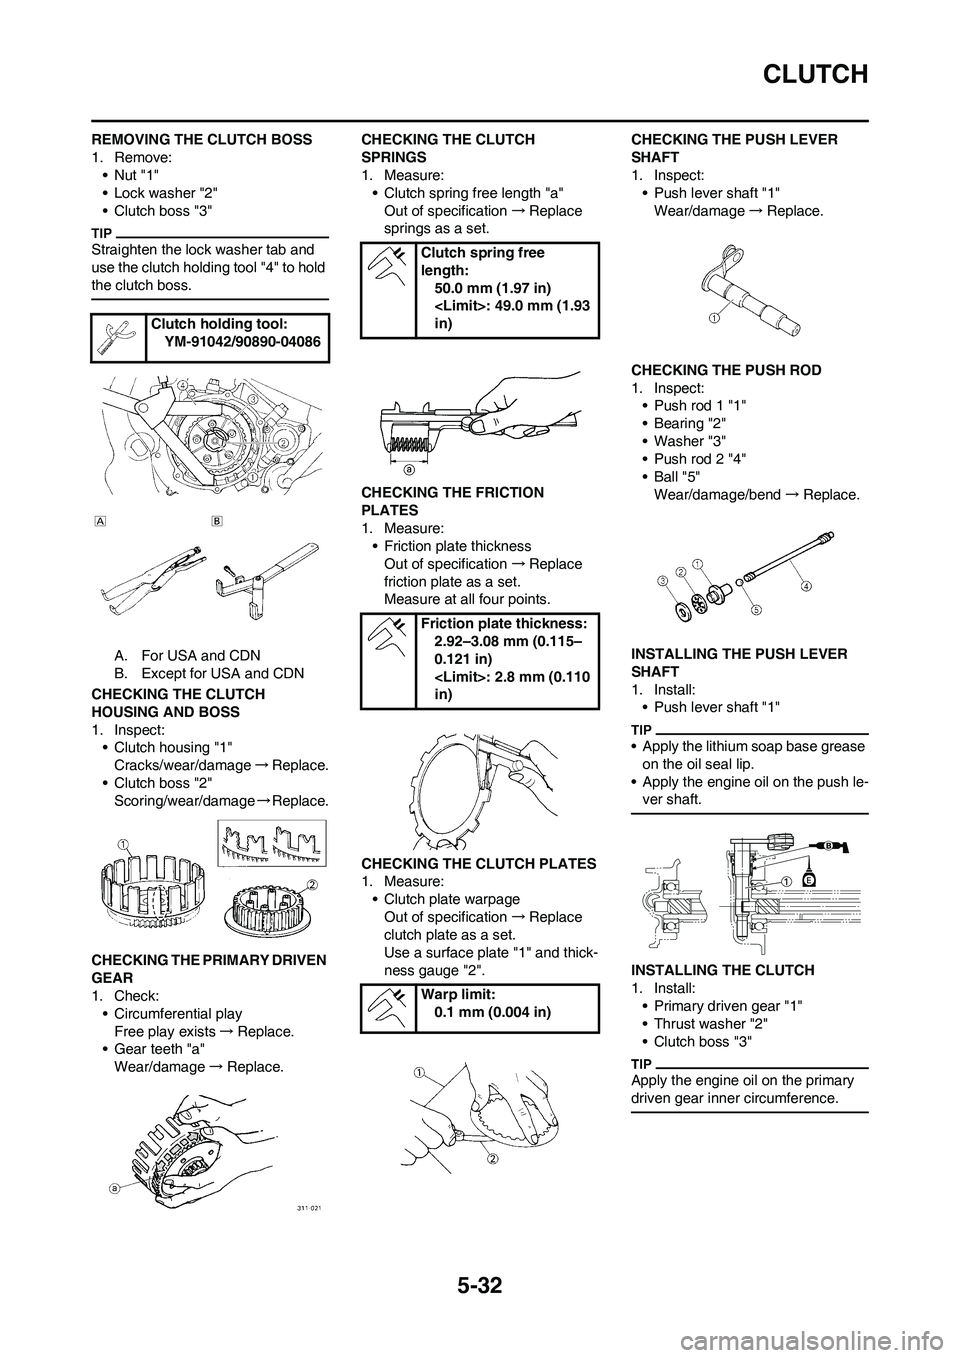 YAMAHA WR 450F 2010 Owners Manual 5-32
CLUTCH
REMOVING THE CLUTCH BOSS
1. Remove:
•Nut "1"
• Lock washer "2"
• Clutch boss "3"
Straighten the lock washer tab and 
use the clutch holding tool "4" to hold 
the clutch boss.
A. For 